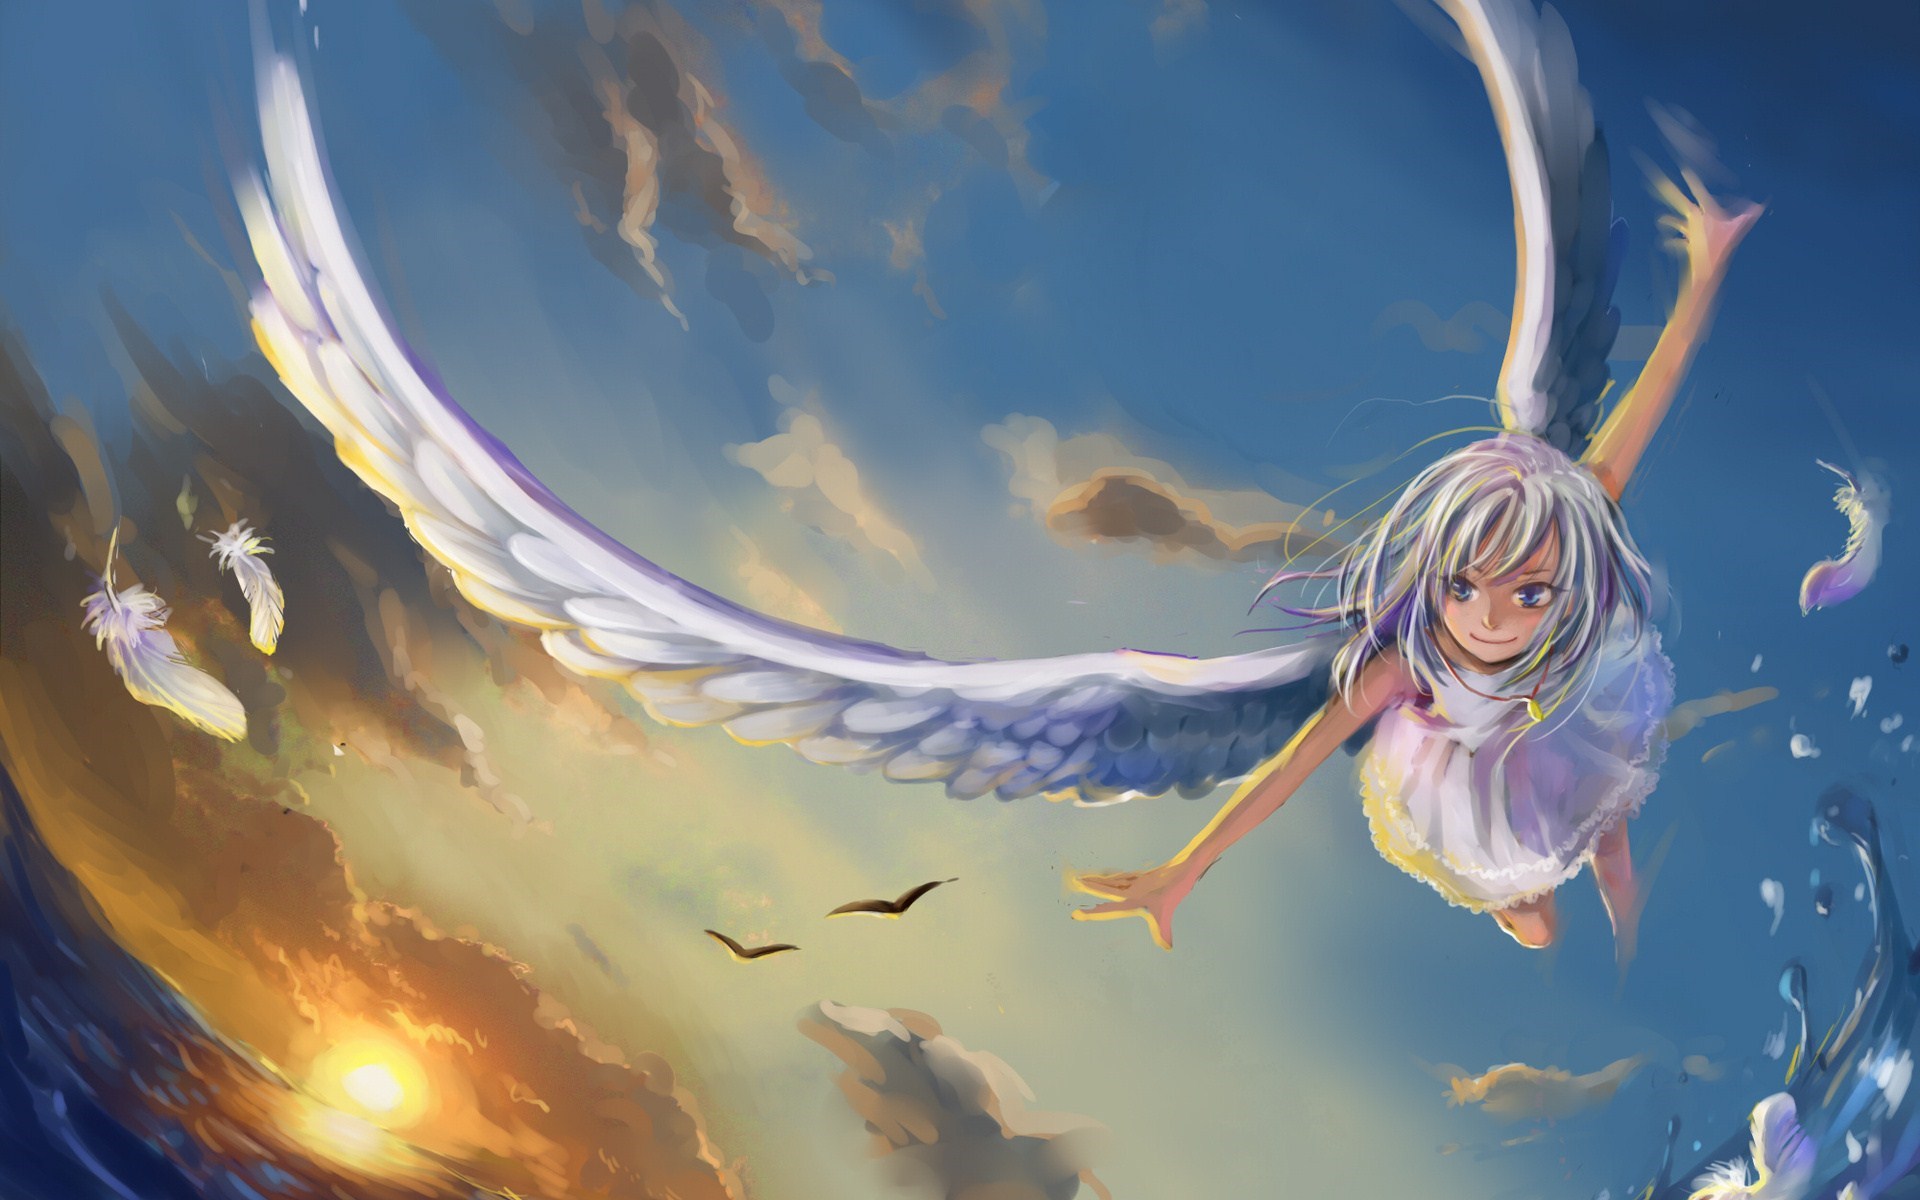 Long Hair Anime Girl With Angel Wings Coloring Pages  Angel Coloring Pages   Coloring Pages For Kids And Adults